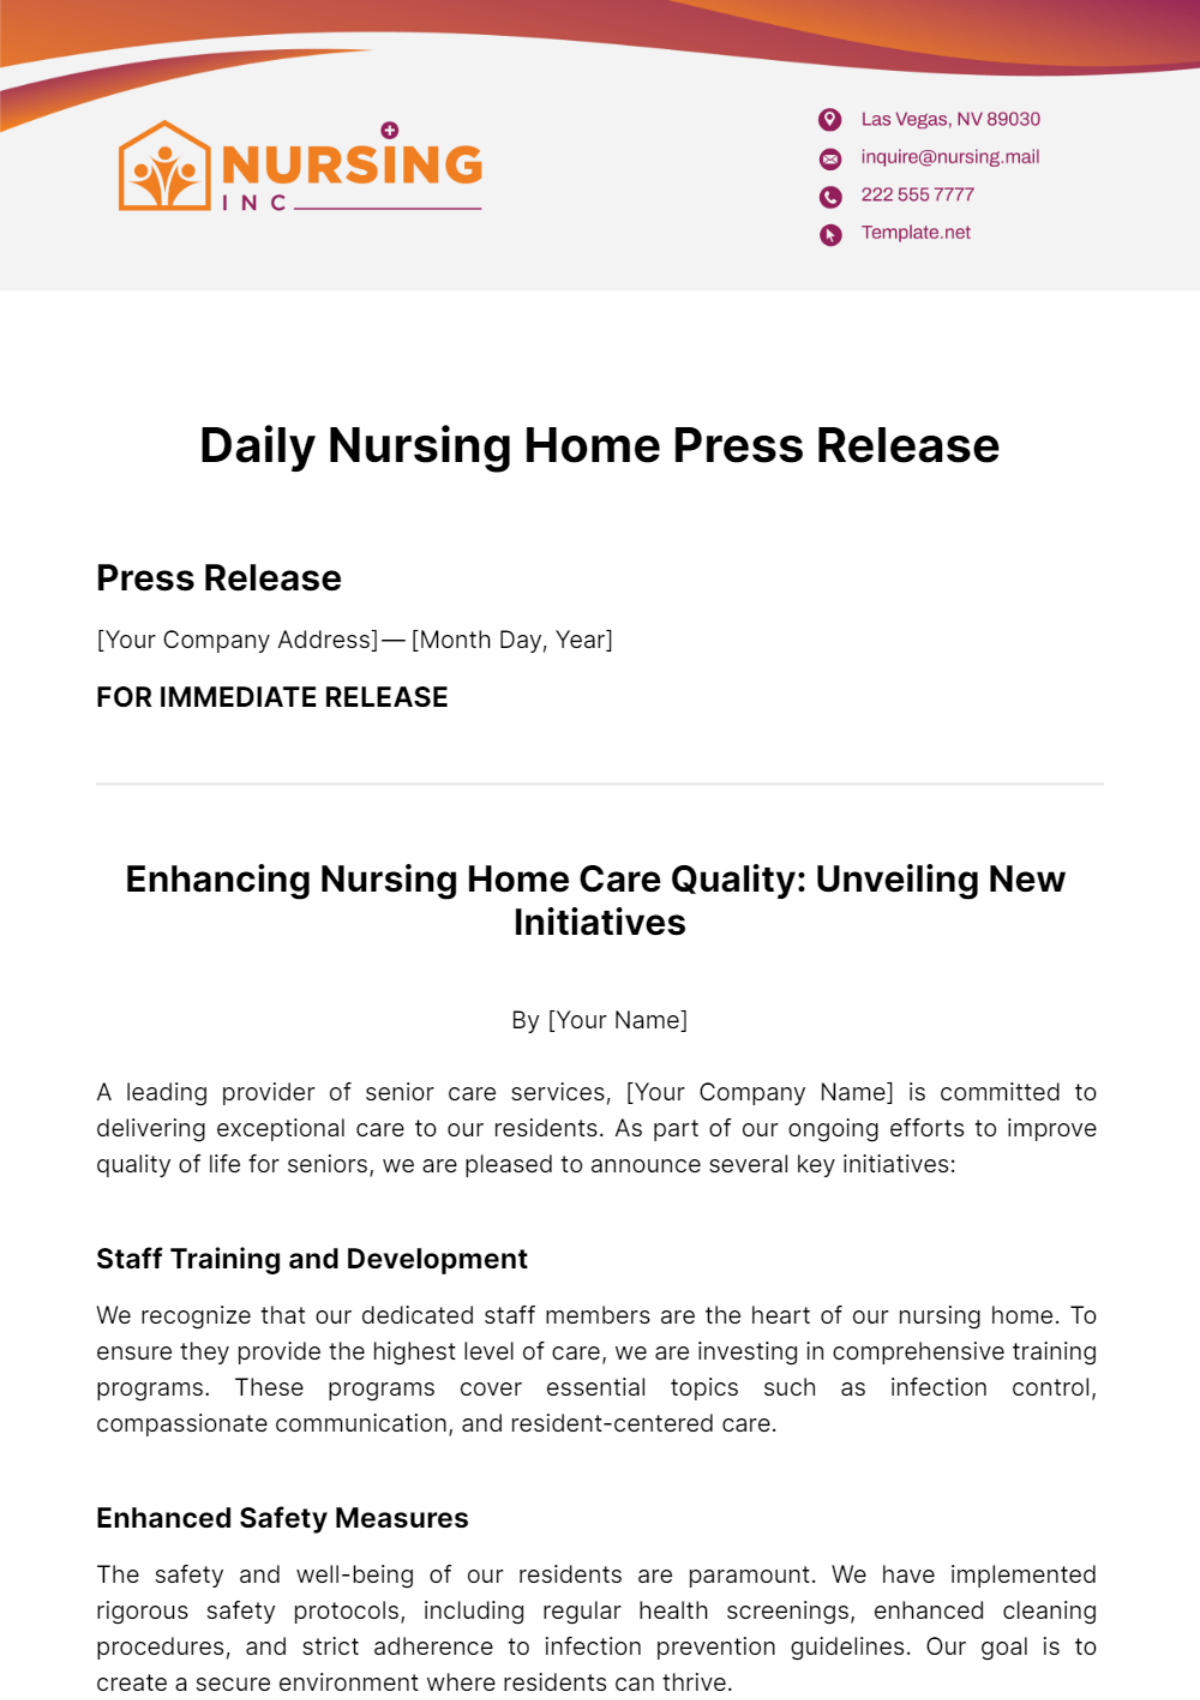 Daily Nursing Home Press Release Template